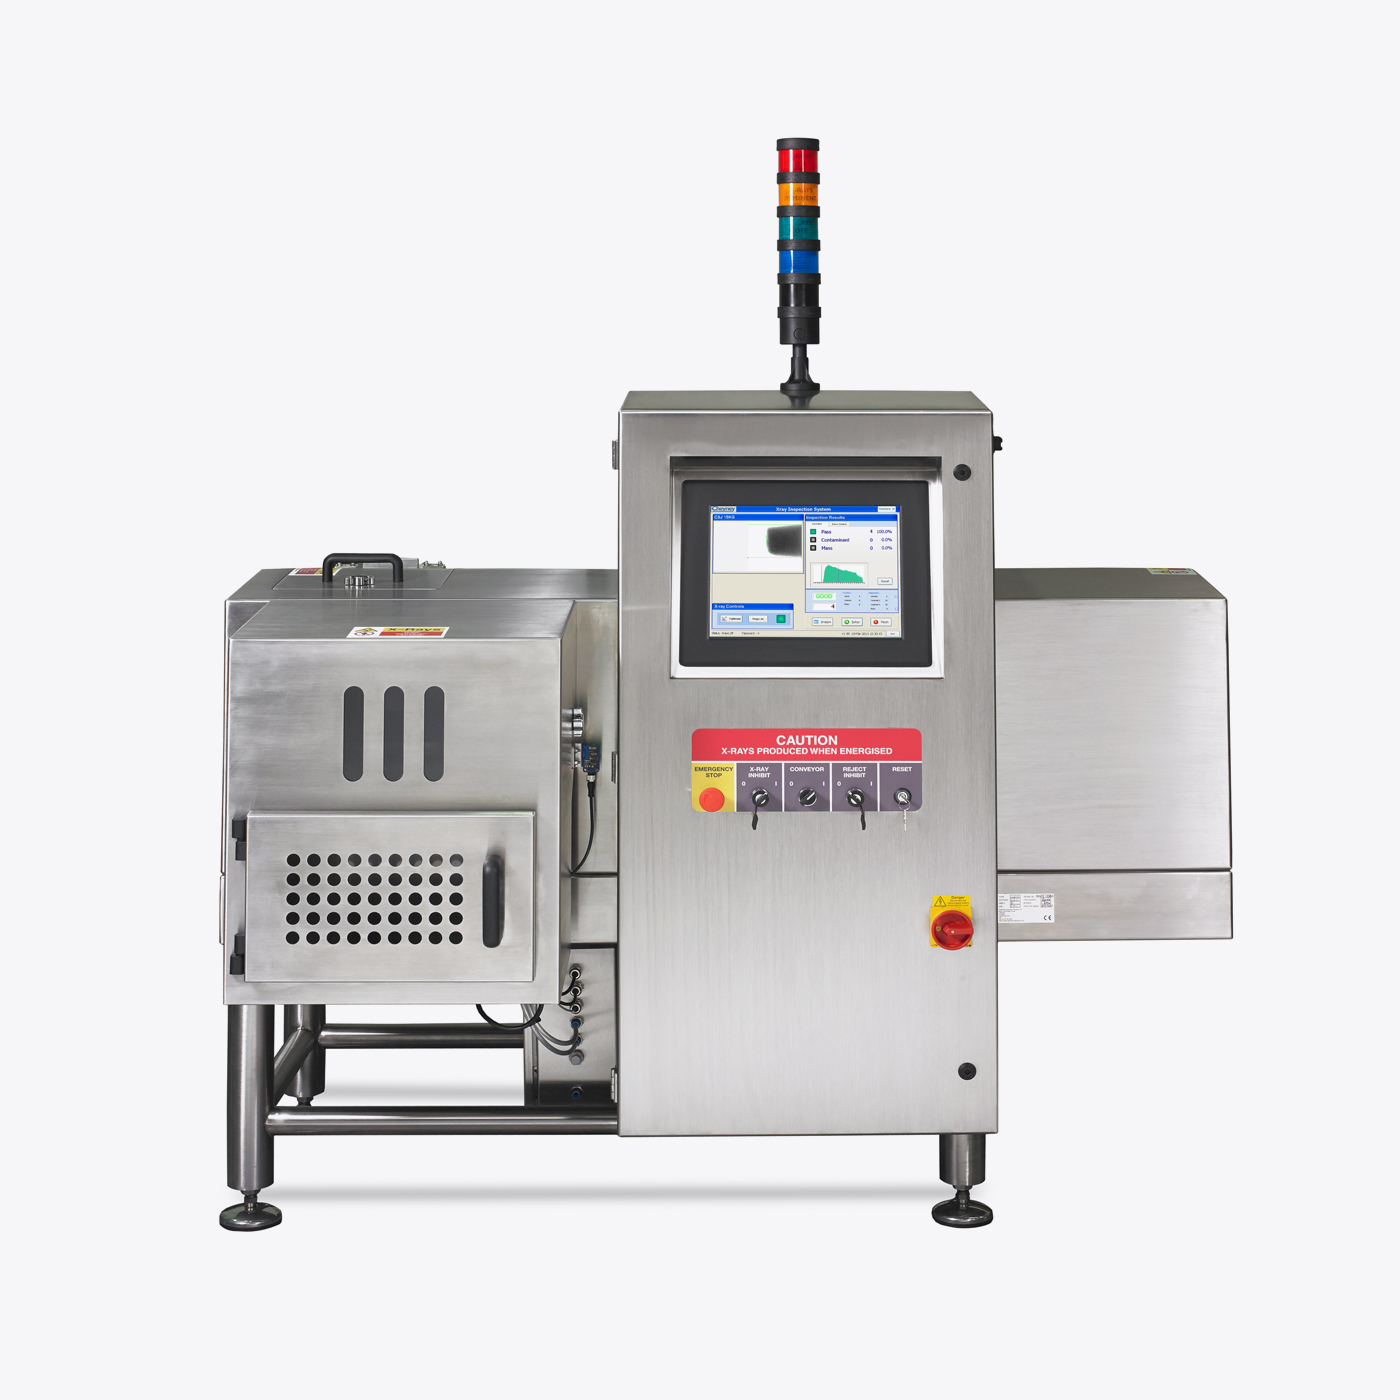 Bestselling X-ray Inspection System G20